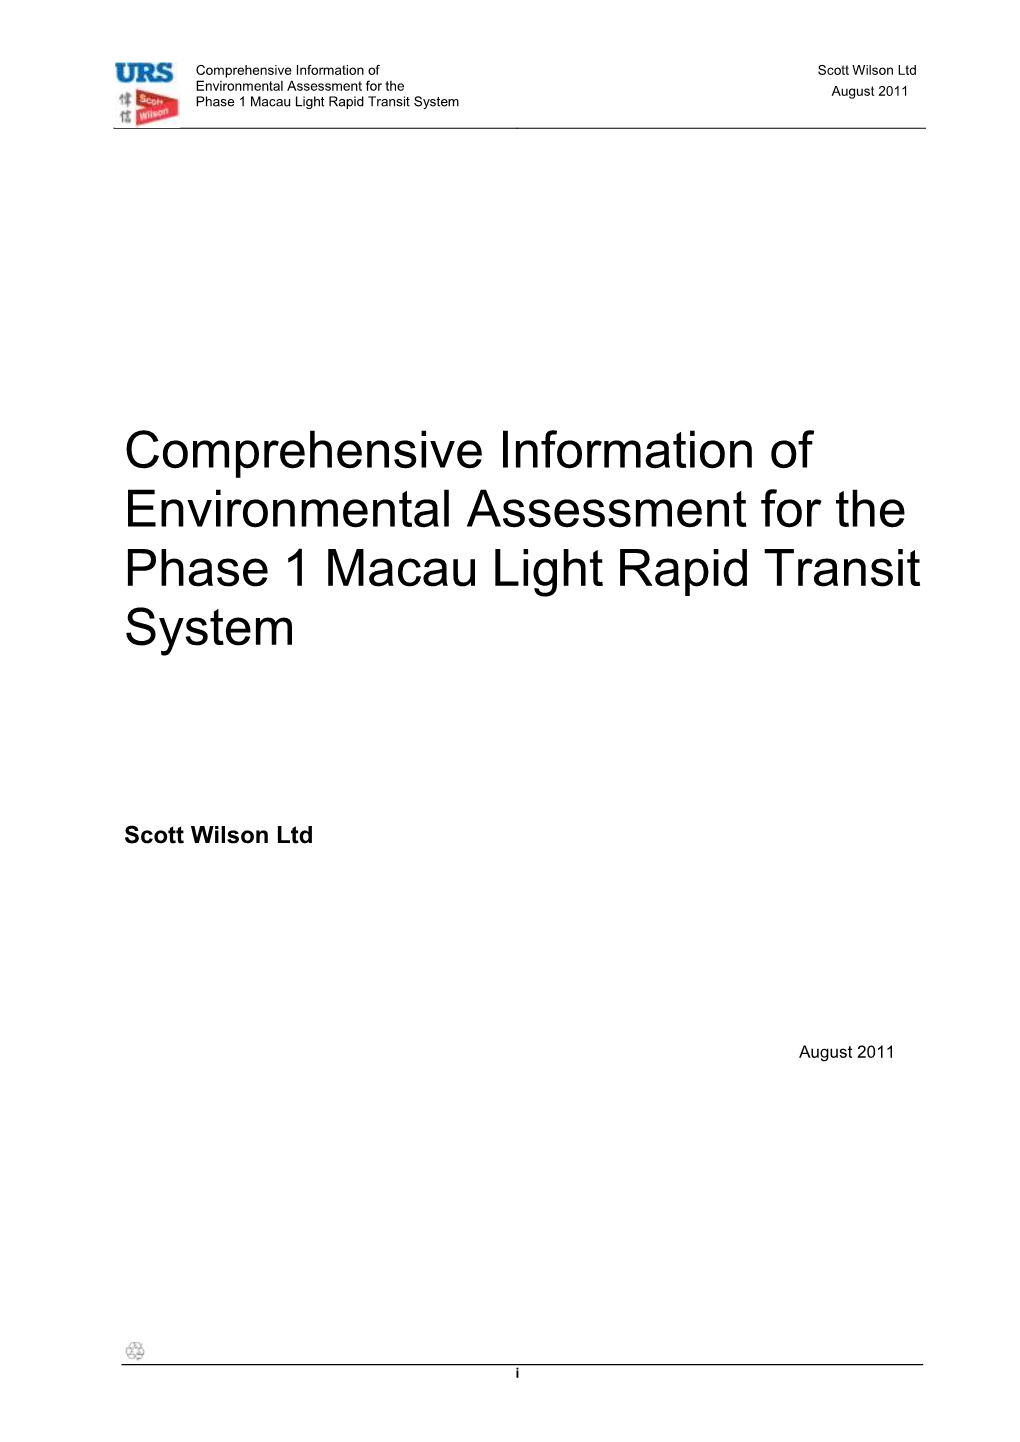 Comprehensive Information of Environmental Assessment for the Phase 1 Macau Light Rapid Transit System